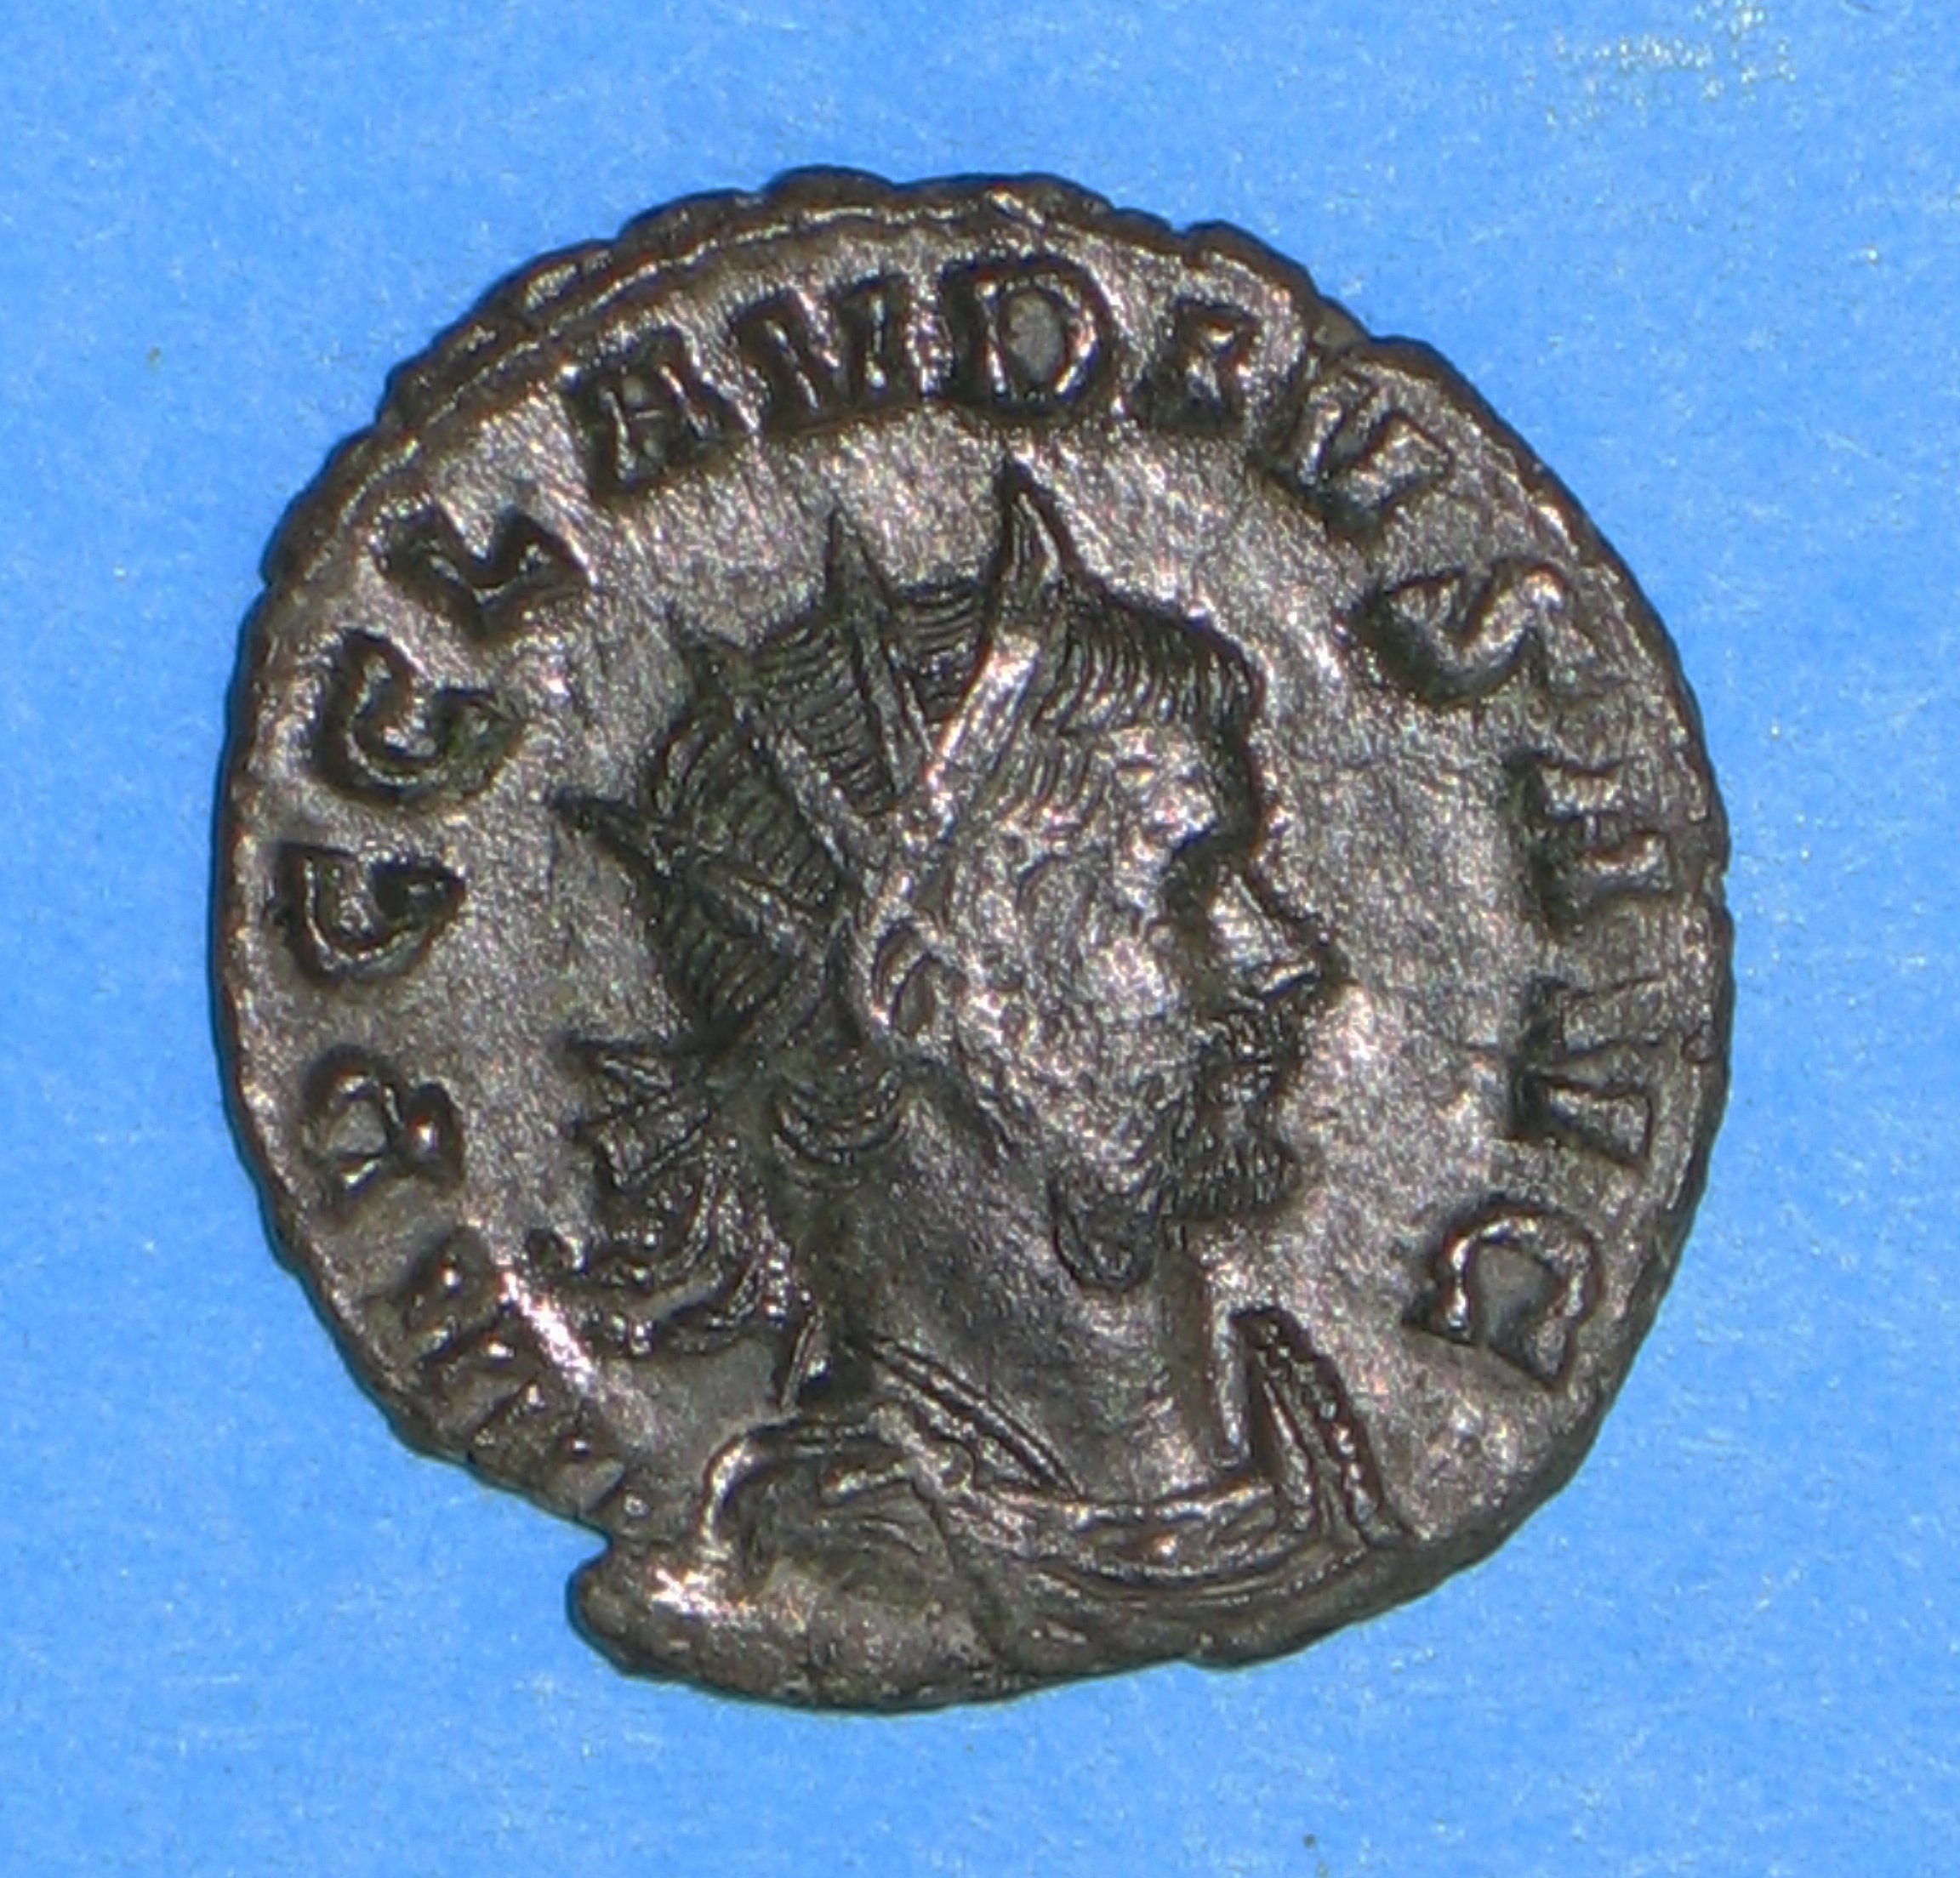 A Roman coin with the Emperor wearing a 'radiant crown'.